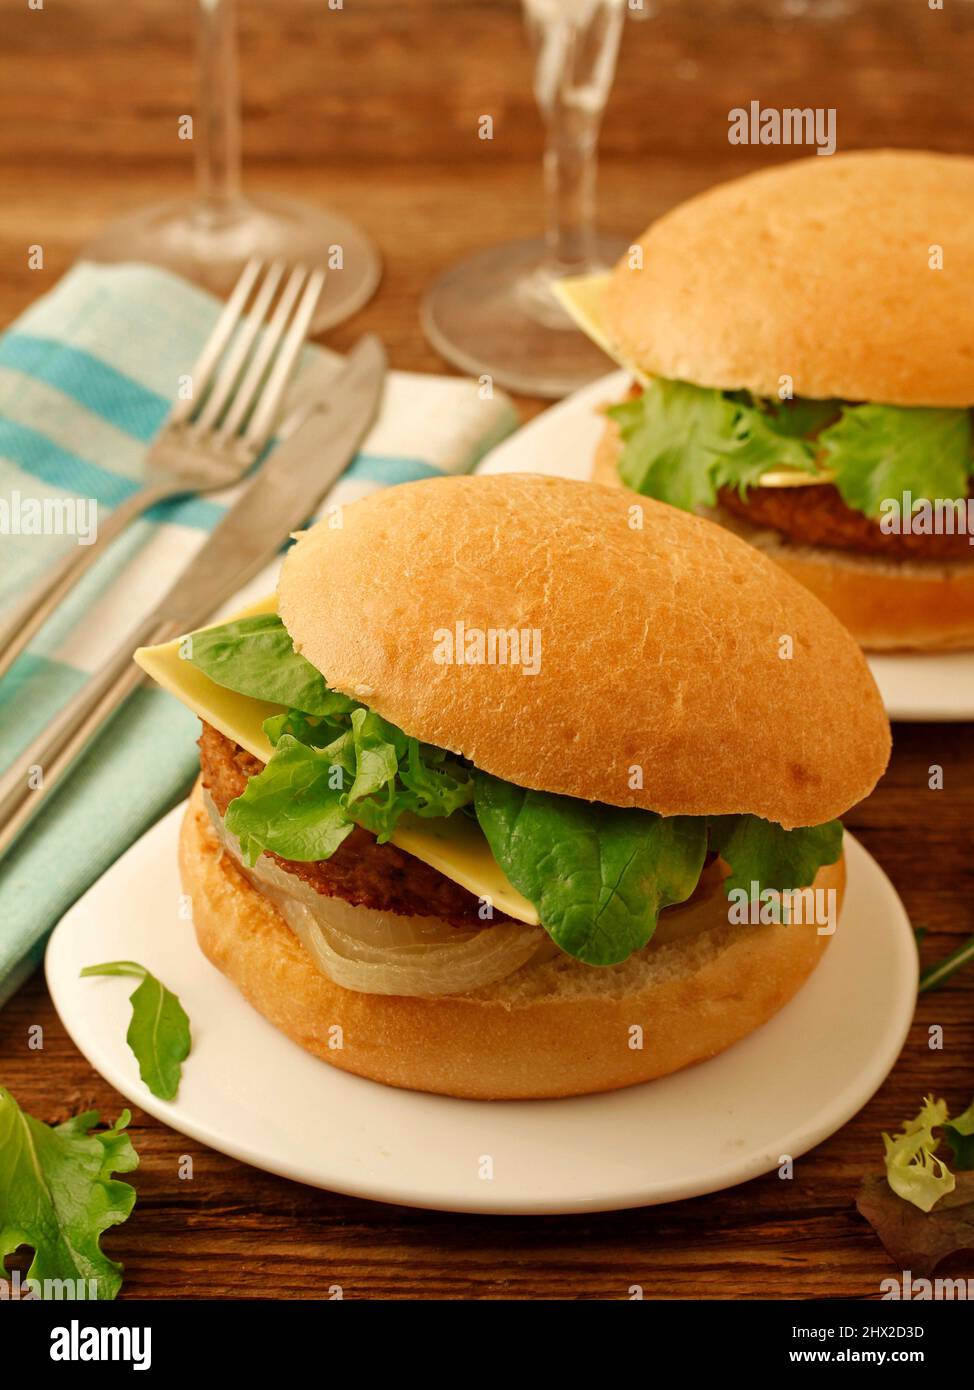 Vegan burger. Meat based on soy and wheat proteins. Cheese based on coconut oil. Stock Photo